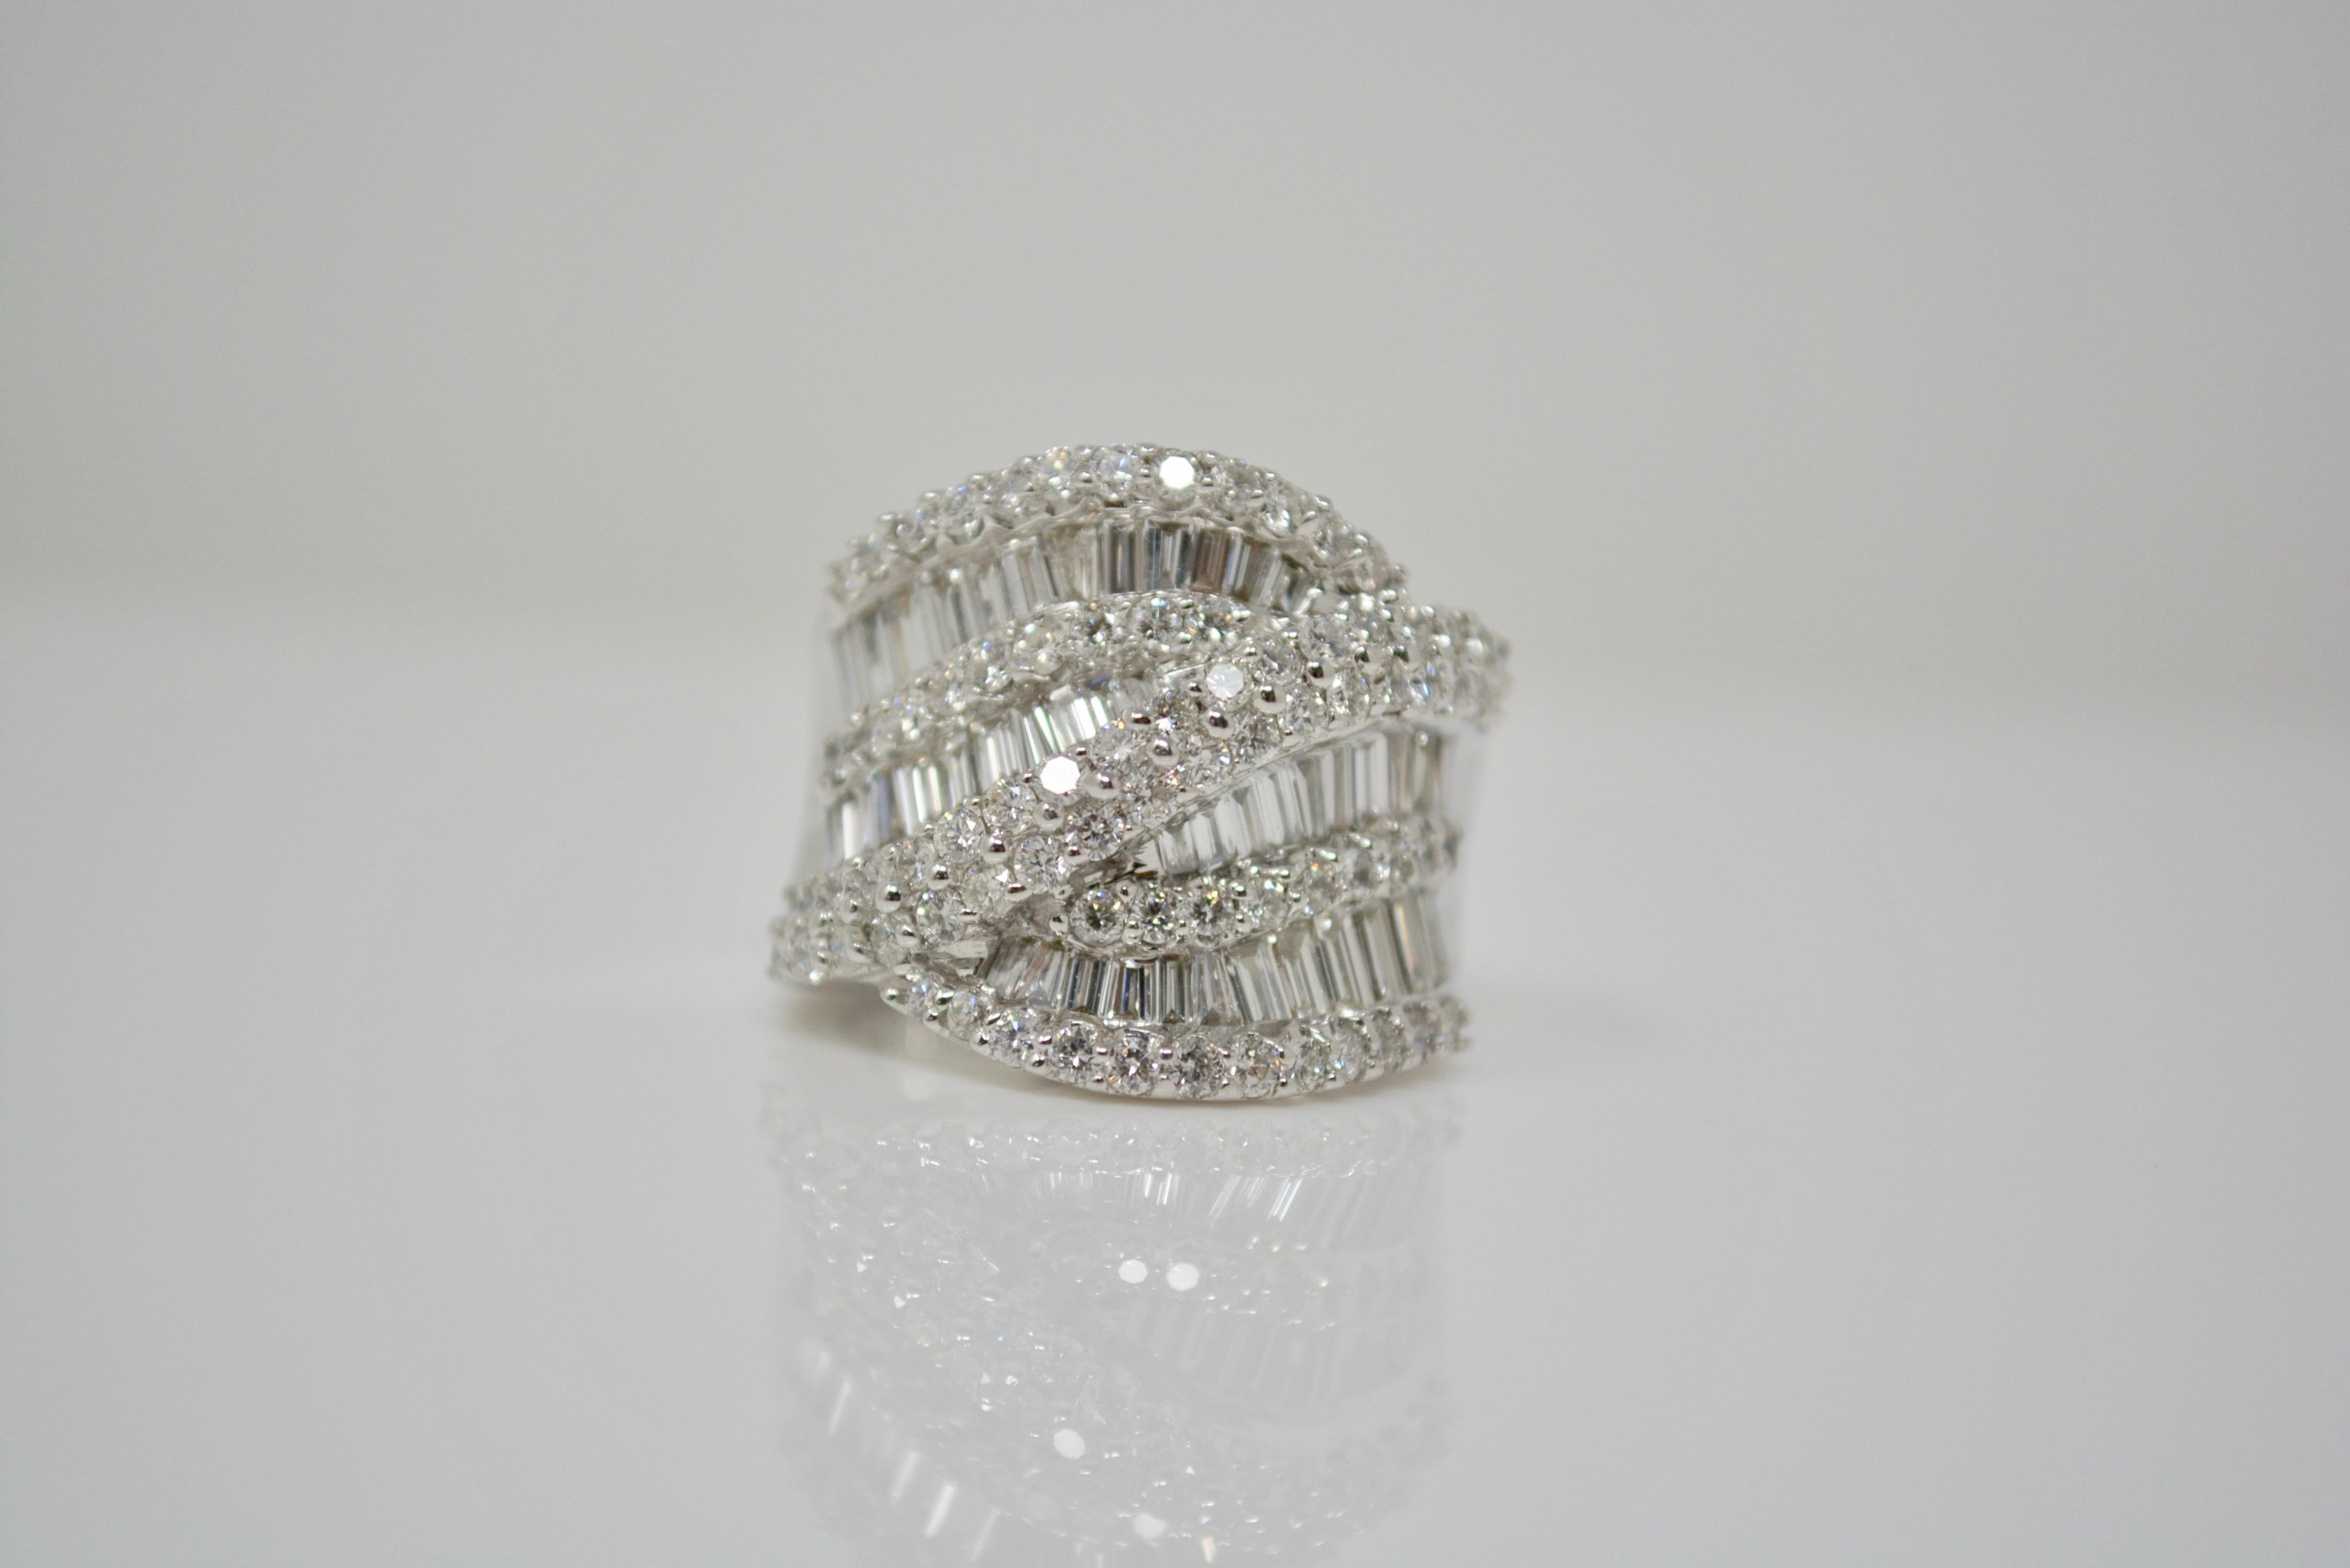 This huge and attractive cocktail ring is going to elevate your jewelry collection! This beautiful ring displays unbelievable spark. It is created be hand in 18 k white gold and features 3.39 carat of white round brilliant and baguette diamonds with